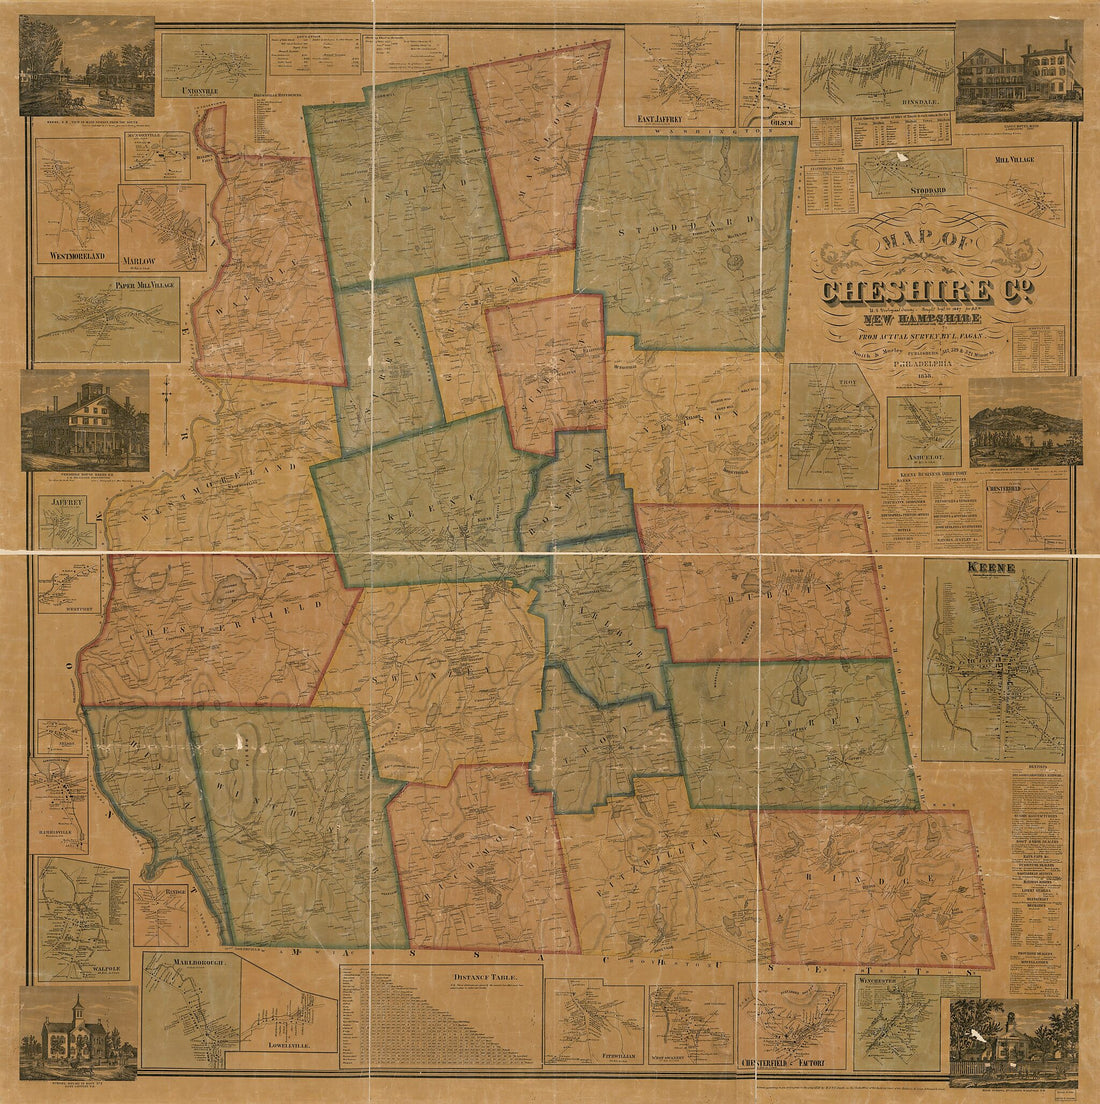 This old map of Map of Cheshire County, New Hampshire (Map of Cheshire County, New Hampshire) from 1858 was created by L. Fagan,  Smith &amp; Morley in 1858